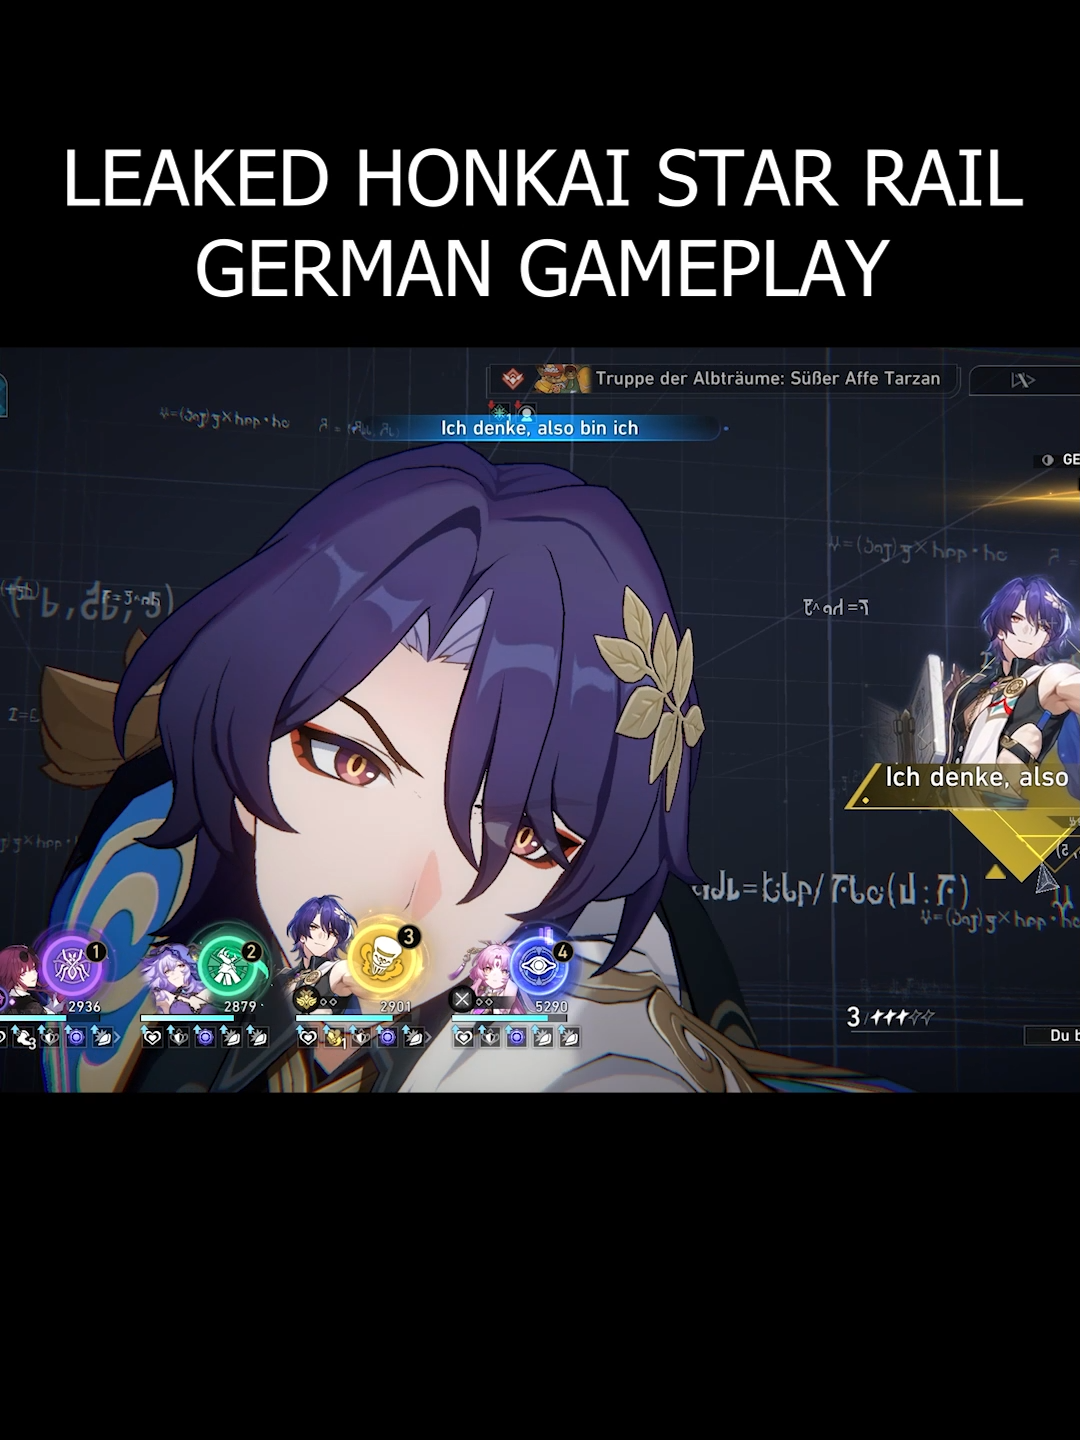 LEAKED GERMAN HONKAI STAR RAIL GAMEPLAY! This is the upcoming german dub for Honkai star Rail. You thought this was the real german dub all along, but it WAS ME, DIO! (I voiced this lol) #HonkaiStarRail #honkai #GenshinImpact #genshin #parody